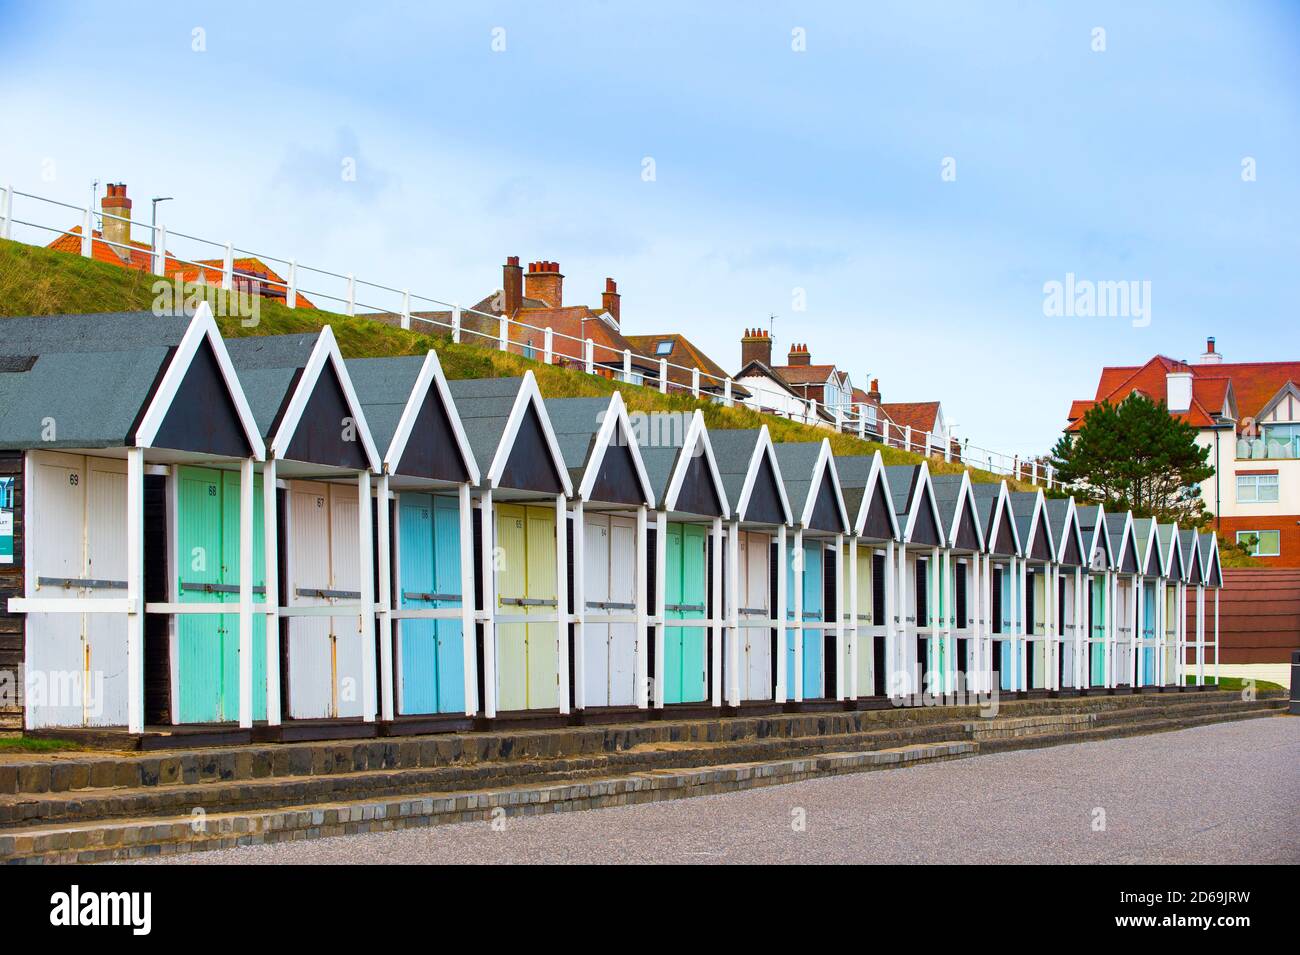 9 October 2020: Bridlington, East Yorkshire.Beach huts. Picture: Sean Spencer/Hull News & Pictures Ltd 01482 210267/07976 433960 www.hullnews.co.uk Stock Photo